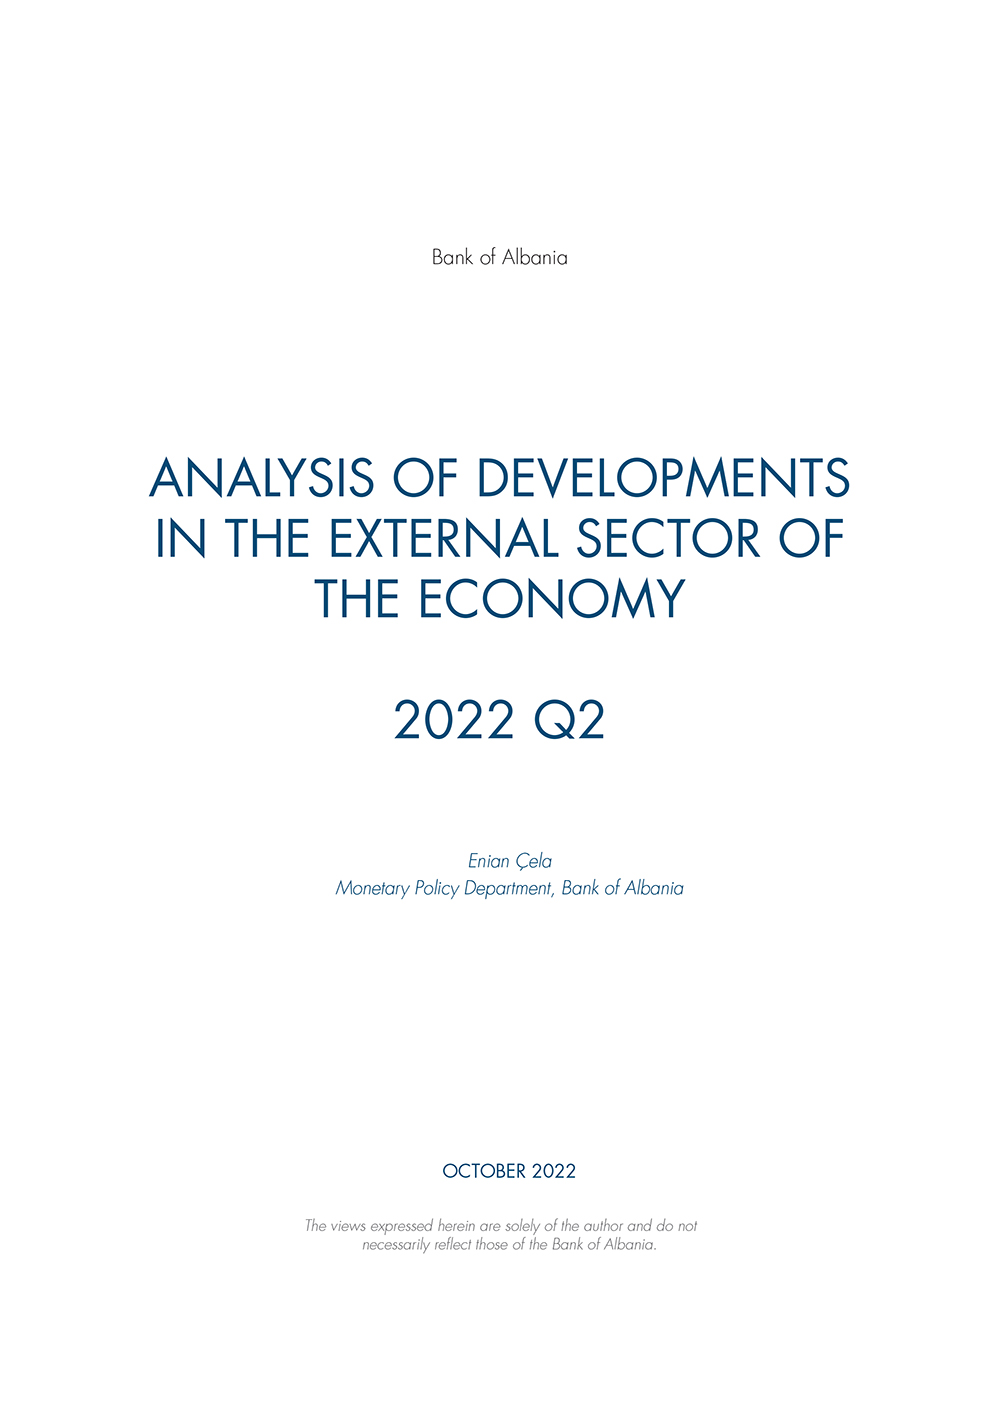 Analysis of developments in the external sector of the economy 2022 Q2